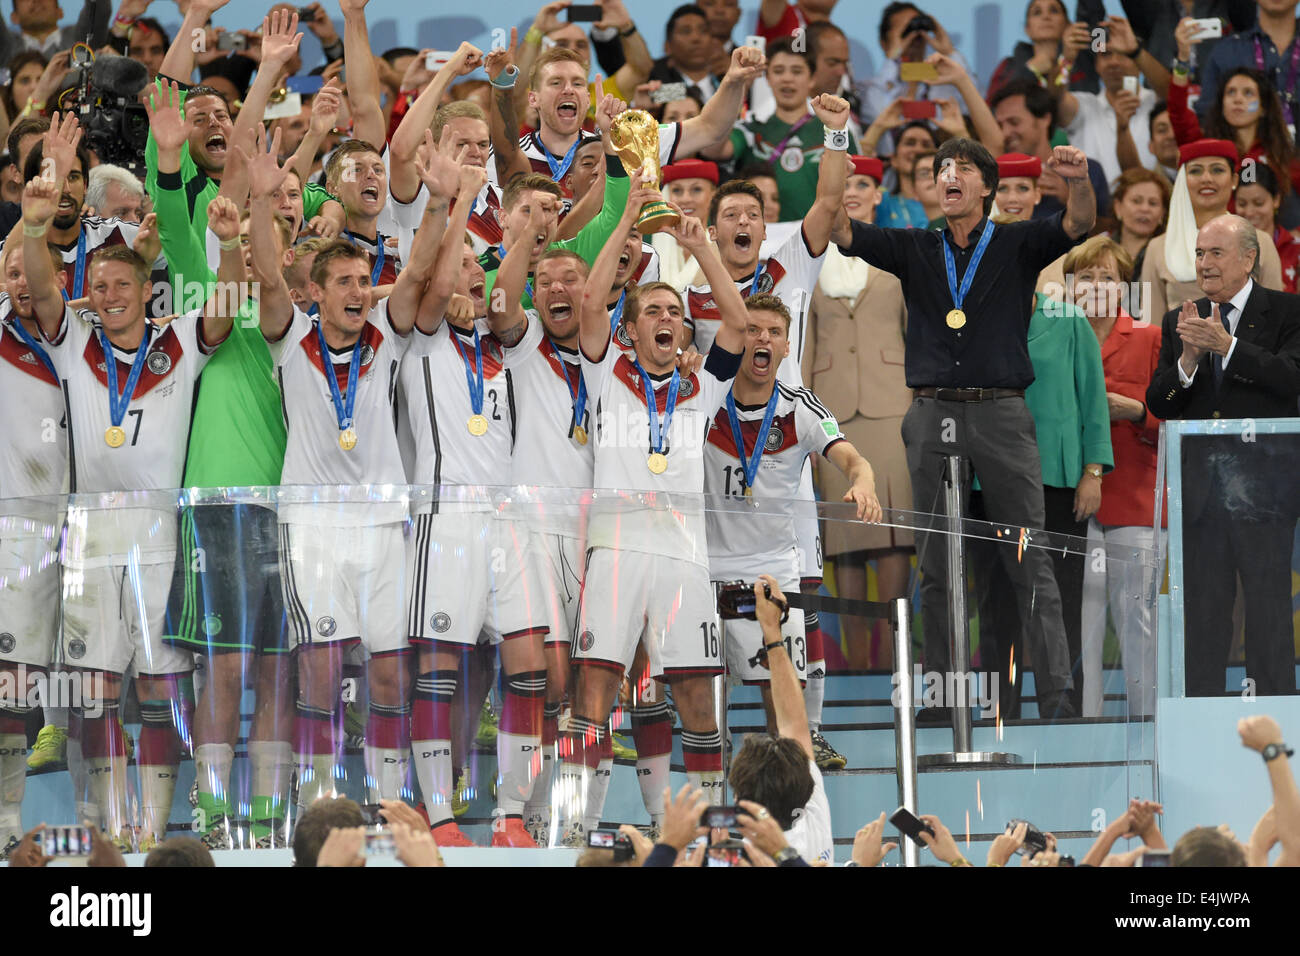 Rio de Janeiro, Brazil. 13th July, 2014. Philipp Lahm (C) of Germany lifts up the World Cup trophy between his teammates Bastian Schweinsteiger (first row L-R), goalkeeper Manuel Neuer Miroslav Klose, Kevin Großkreutz, Lukas Podolski and Thomas Mueller; Headcoach Joachim Loew of Germany (second row R-L) and Mesut Oezil after winning the FIFA World Cup 2014 final soccer match between Germany and Argentina at the Estadio do Maracana in Rio de Janeiro, Brazil, 13 July 2014. Photo:Andreas Gebert/dpa/Alamy Live News Stock Photo